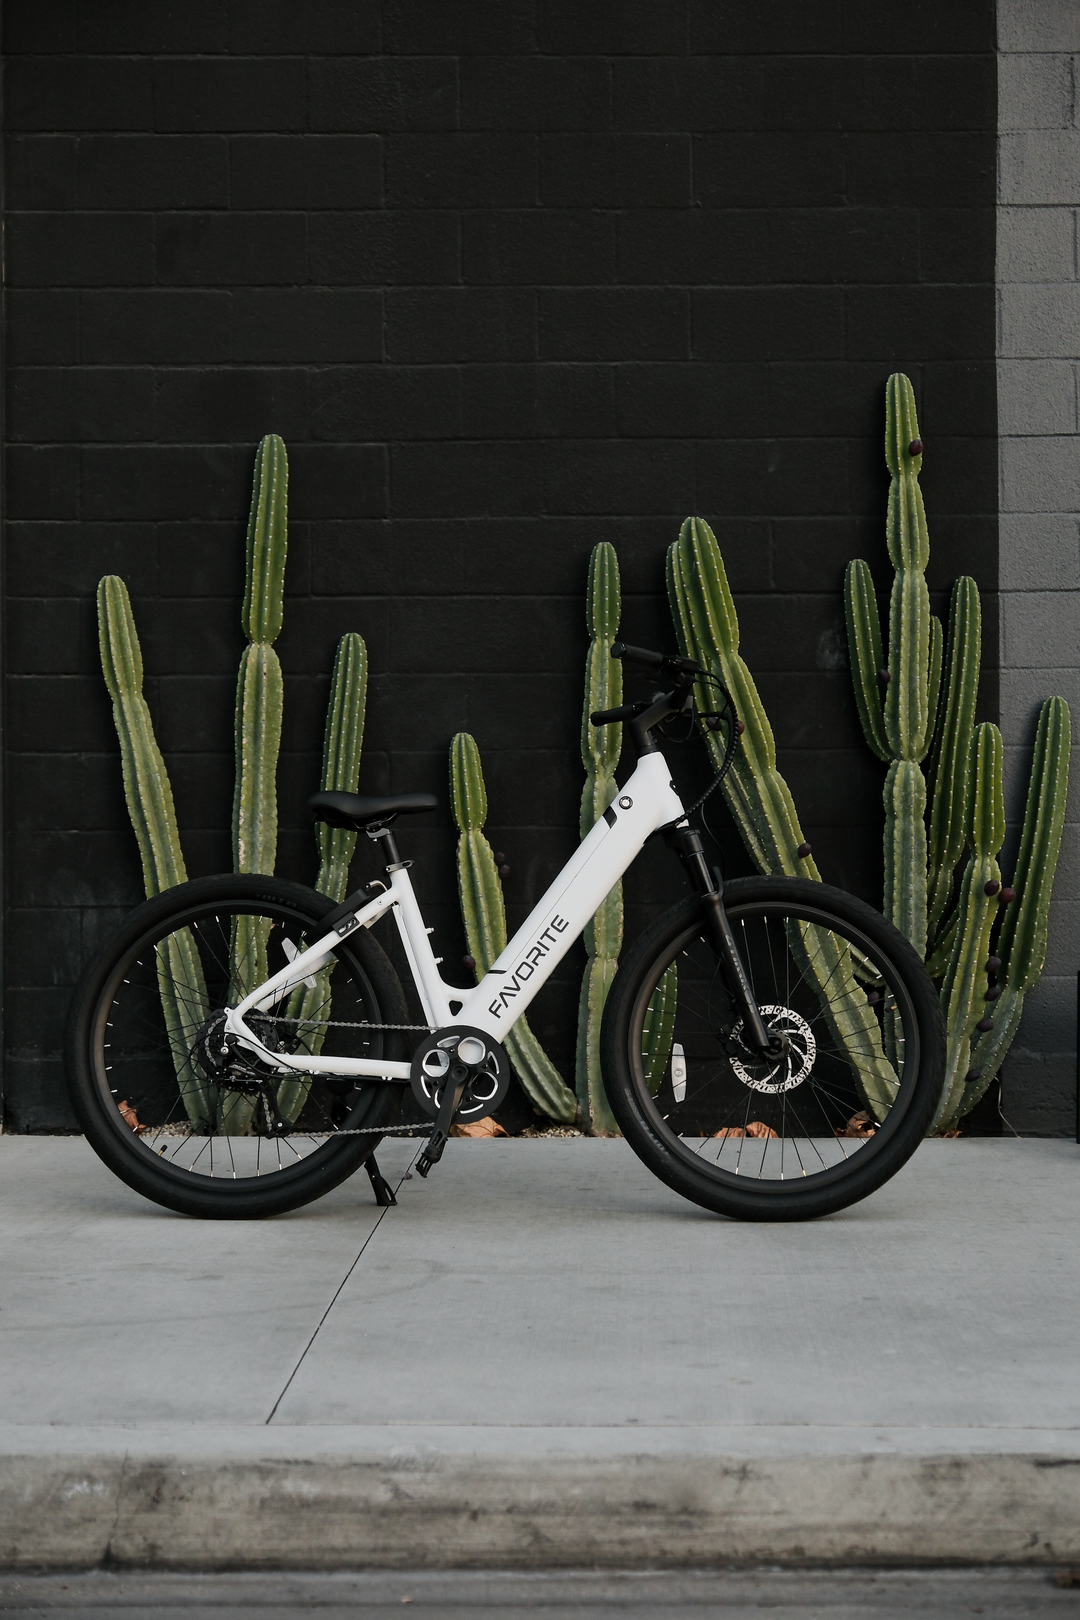 Essential Maintenance Tips for Prolonging the Life of Your E-Bike